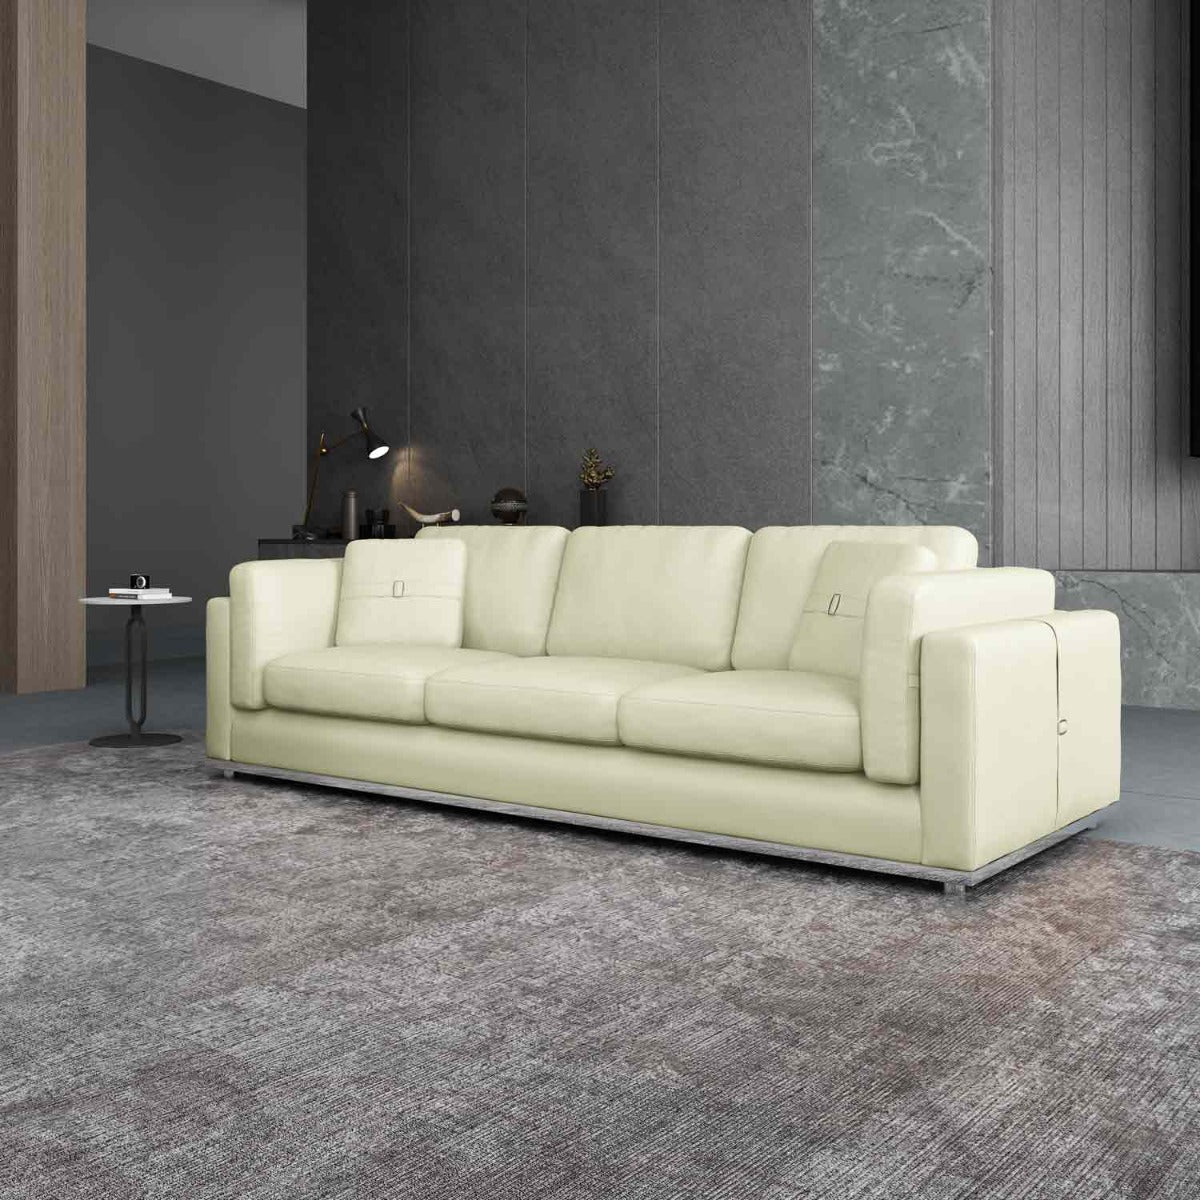 European Furniture - Picasso Sofa in Off White - 25551-S - New Star Living